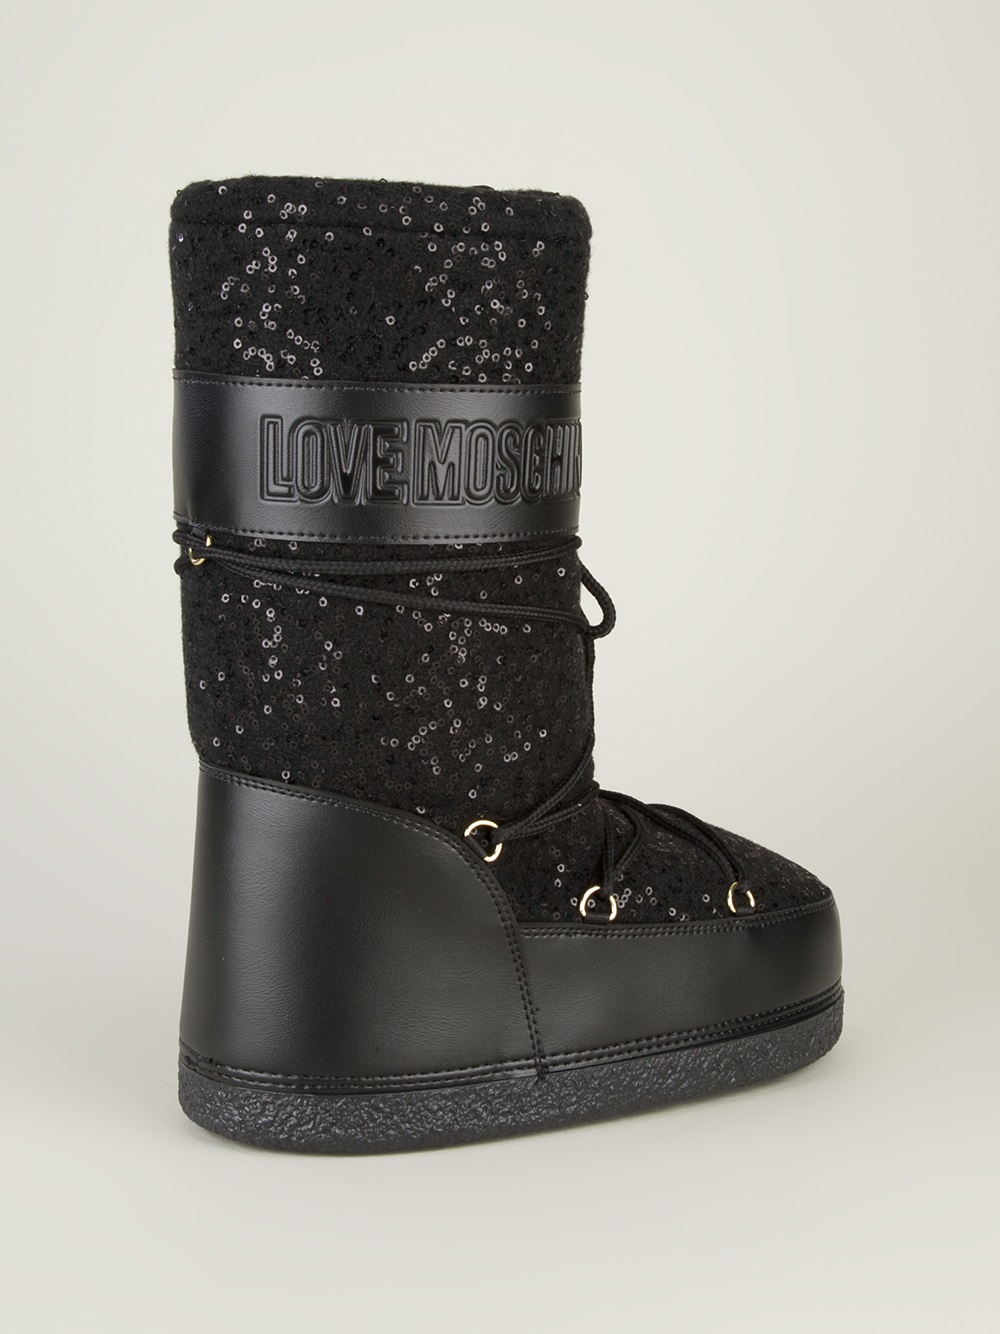 moschino moon boots sale